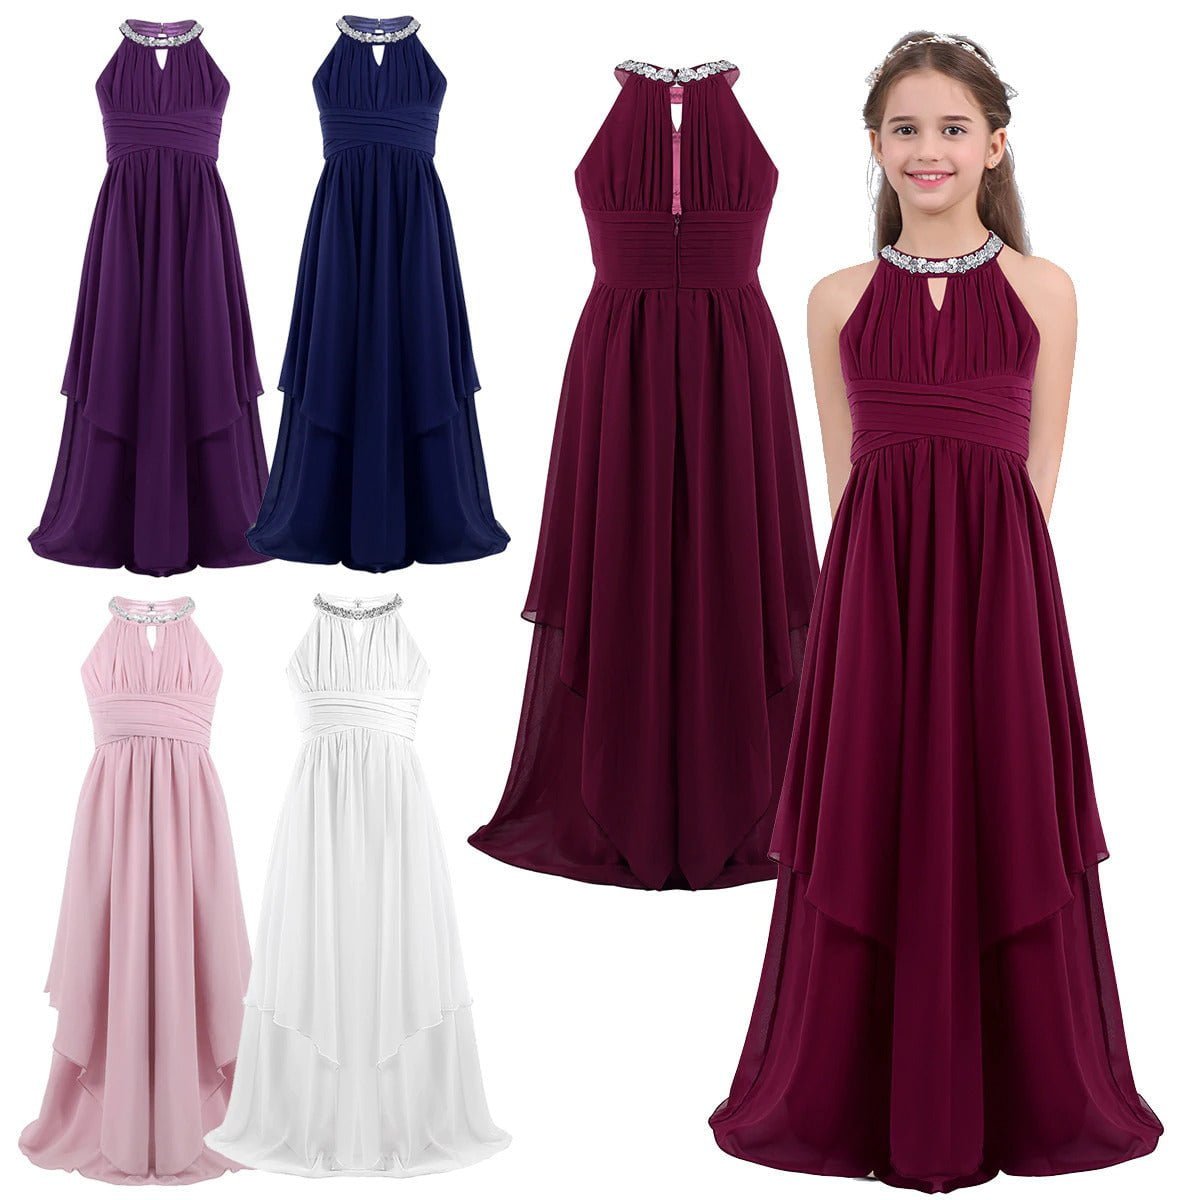 Ball Gown Quinceanera Dresses Beads Sweet 16 Dress For 15 Years Debutante  Gowns | eBay